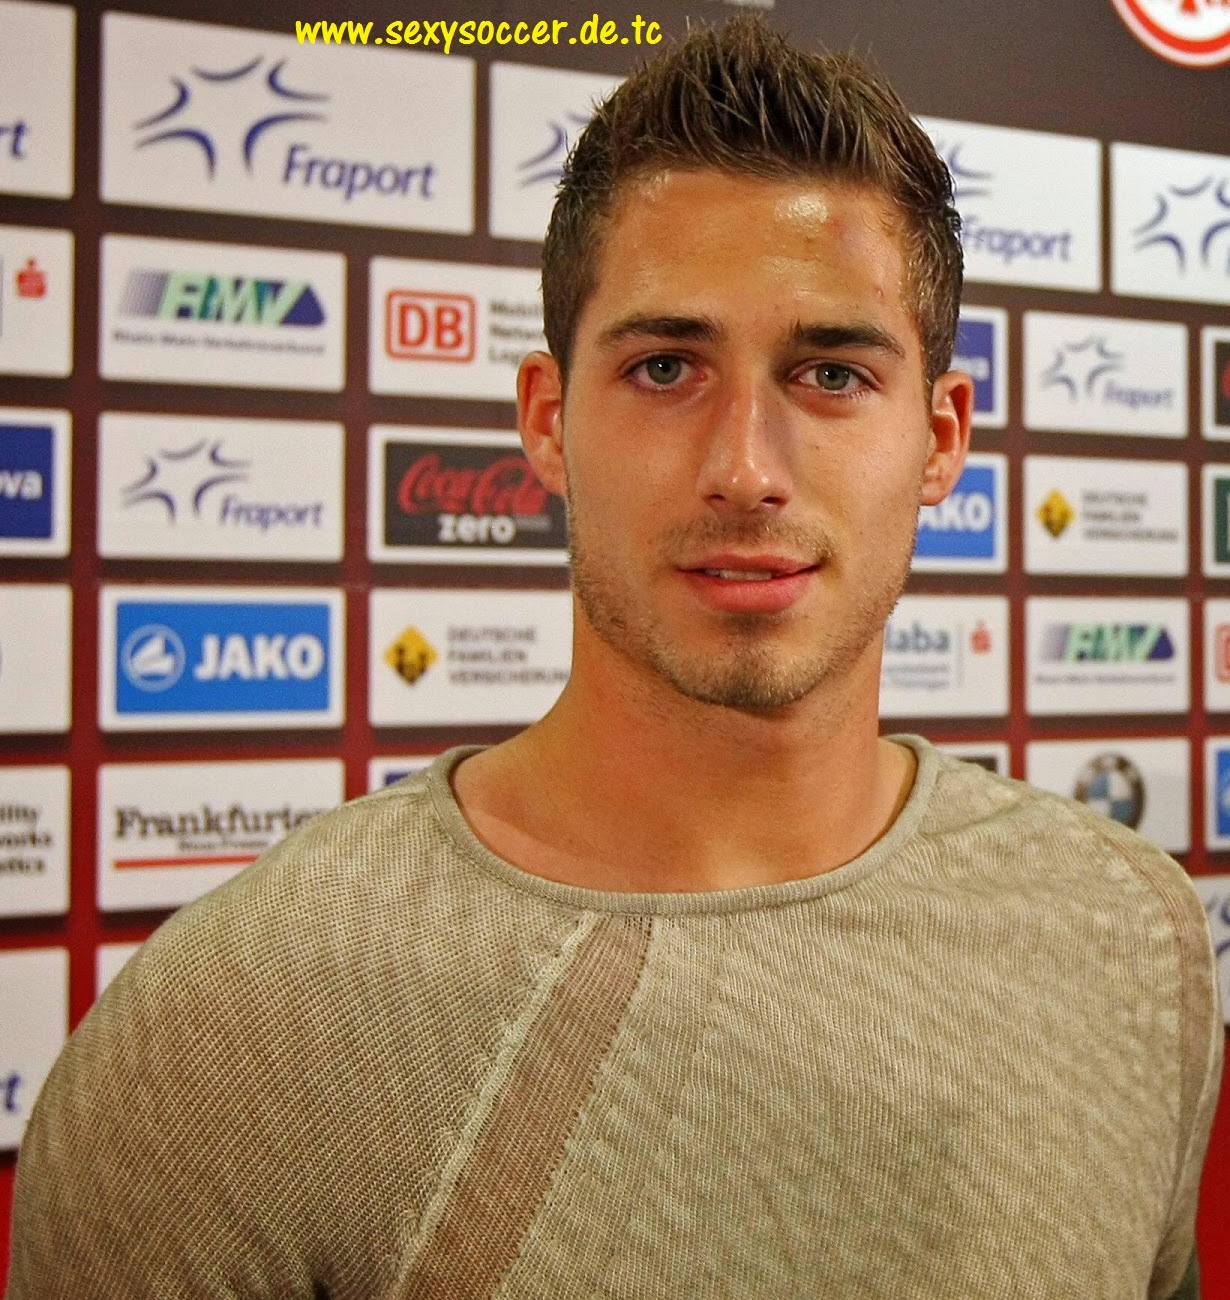 FOOTBALLERS 500+: KEVIN TRAPP